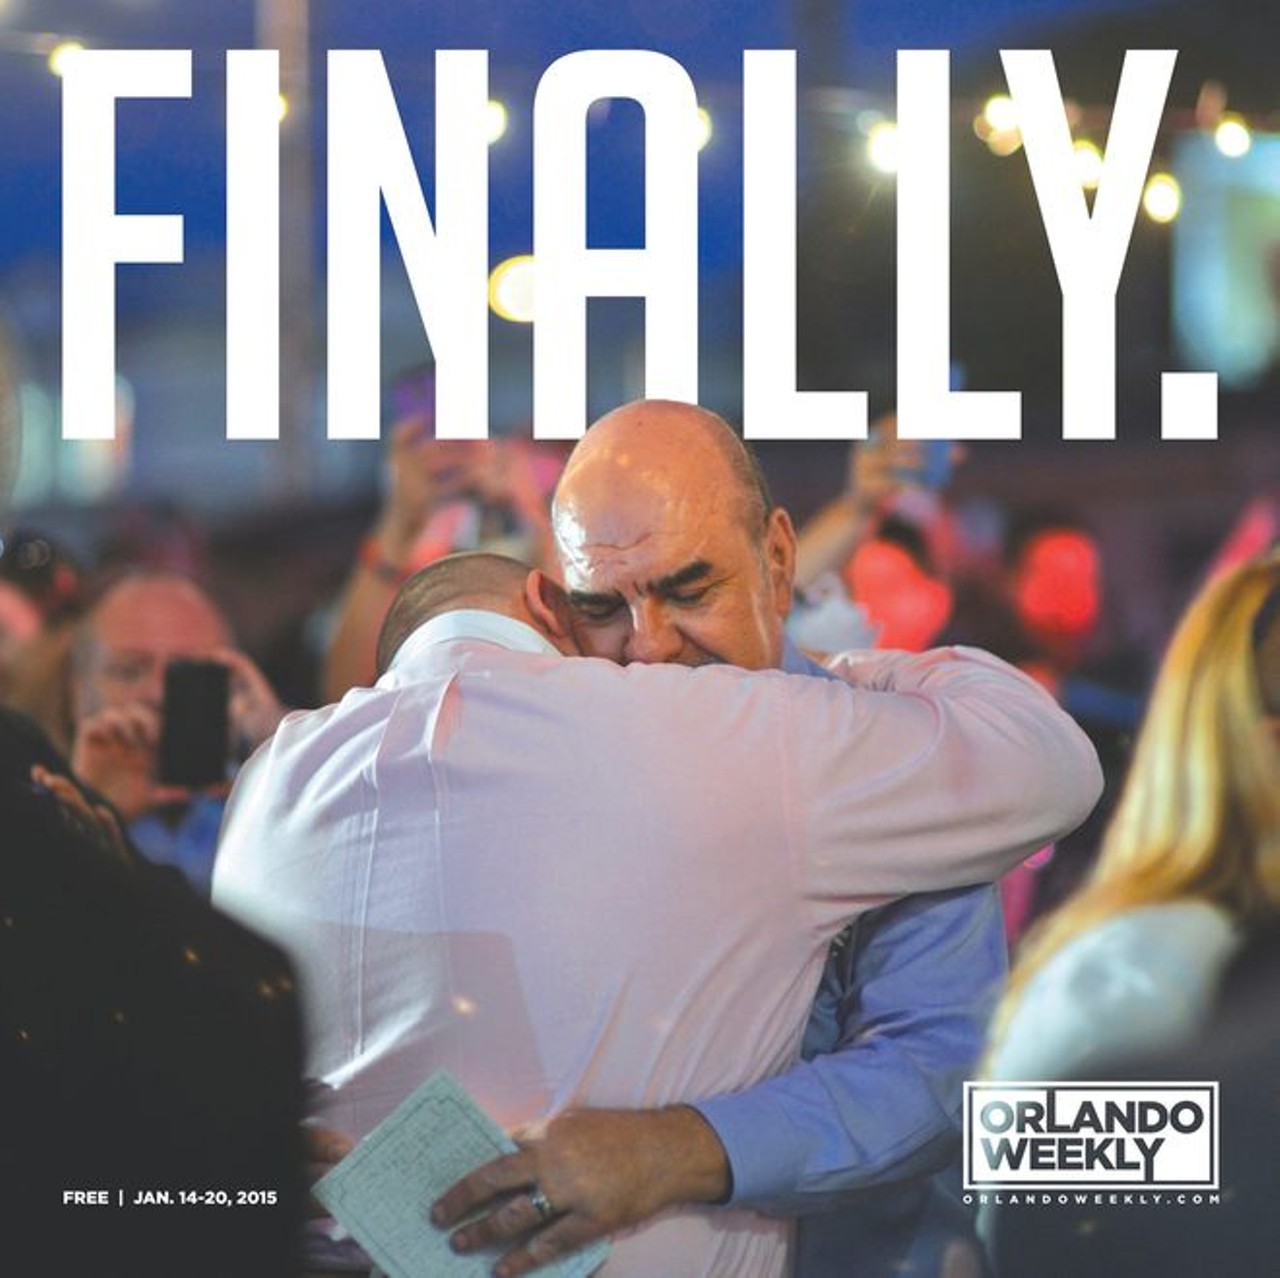 Gay Marriage Has Been Legalized
This one might be my absolute favorite cover of the year. I minimized our logo because it just wasn&#146;t about us, it was about hope. I just fell in love with Carlos Amoedo&#146;s photo that he captured of the celebration after the mass gay marriage at City Hall. The sincerity of the embrace in the middle of the crowd &#151; nobody else in the world exists to them, not even the onlooker behind them on safari with his camera phone. It was a pure moment, and there was only one word any of us could use to describe this point in history: &#147;Finally.&#148;